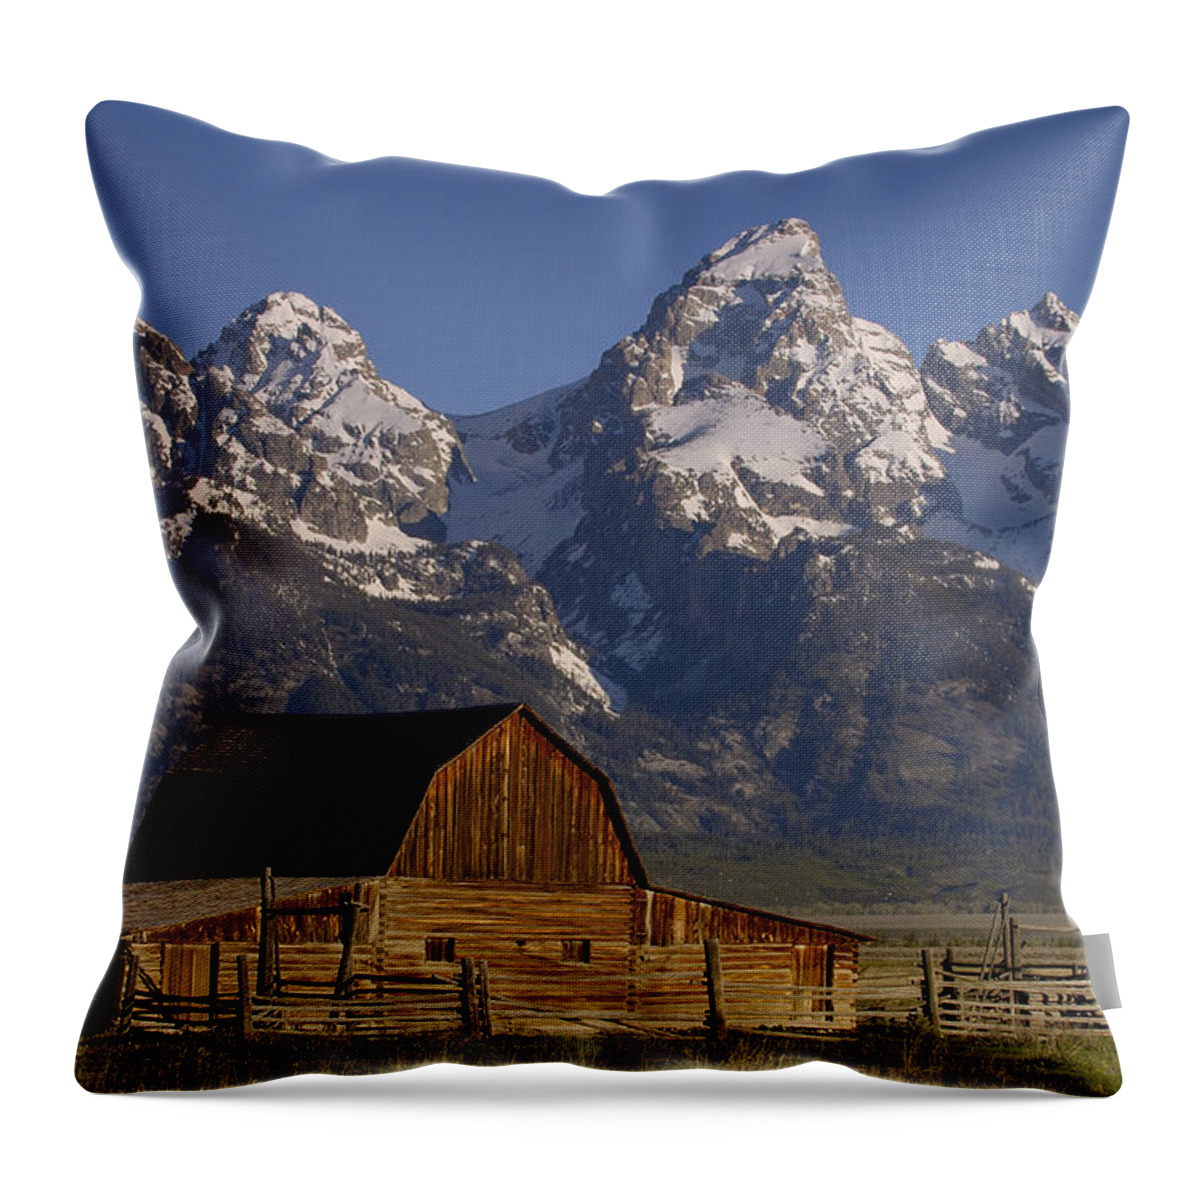 00210002 Throw Pillow featuring the photograph Cunningham Cabin and Tetons by Pete Oxford